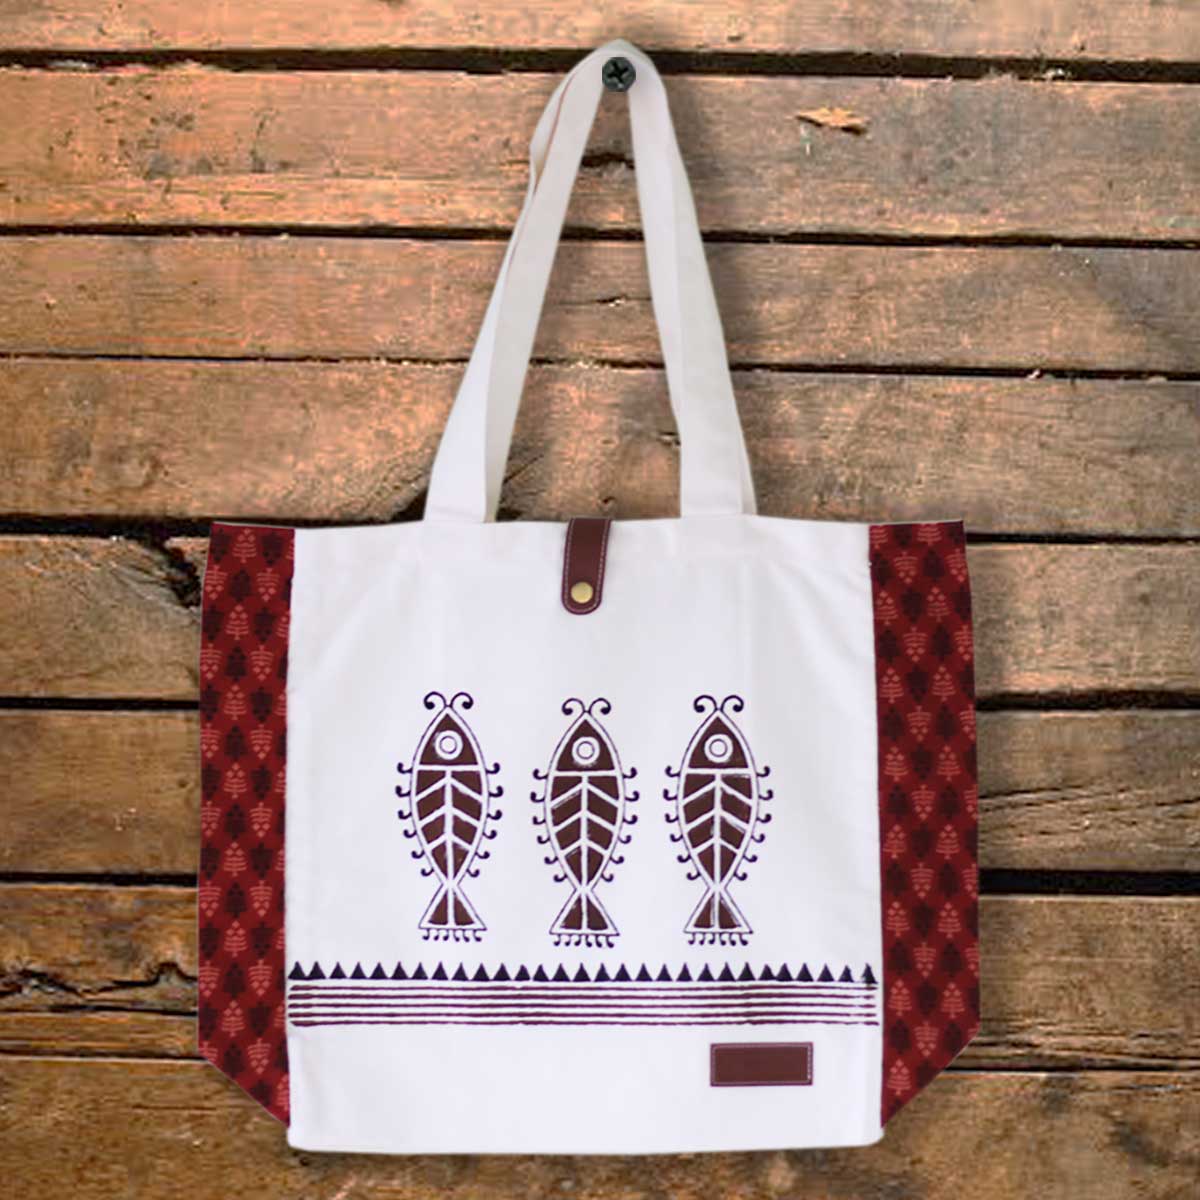 Tote bags – a perfect blend of beauty and utility